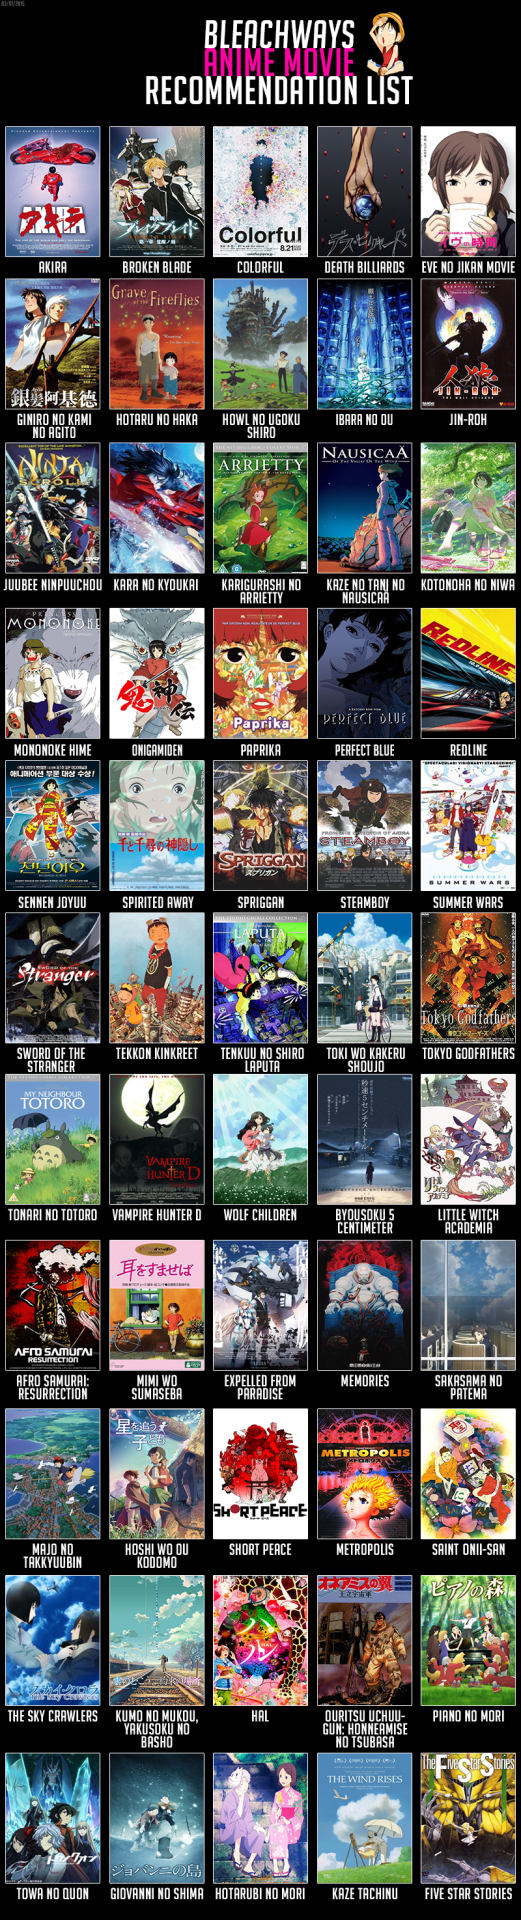 Anime Recommendation Chart